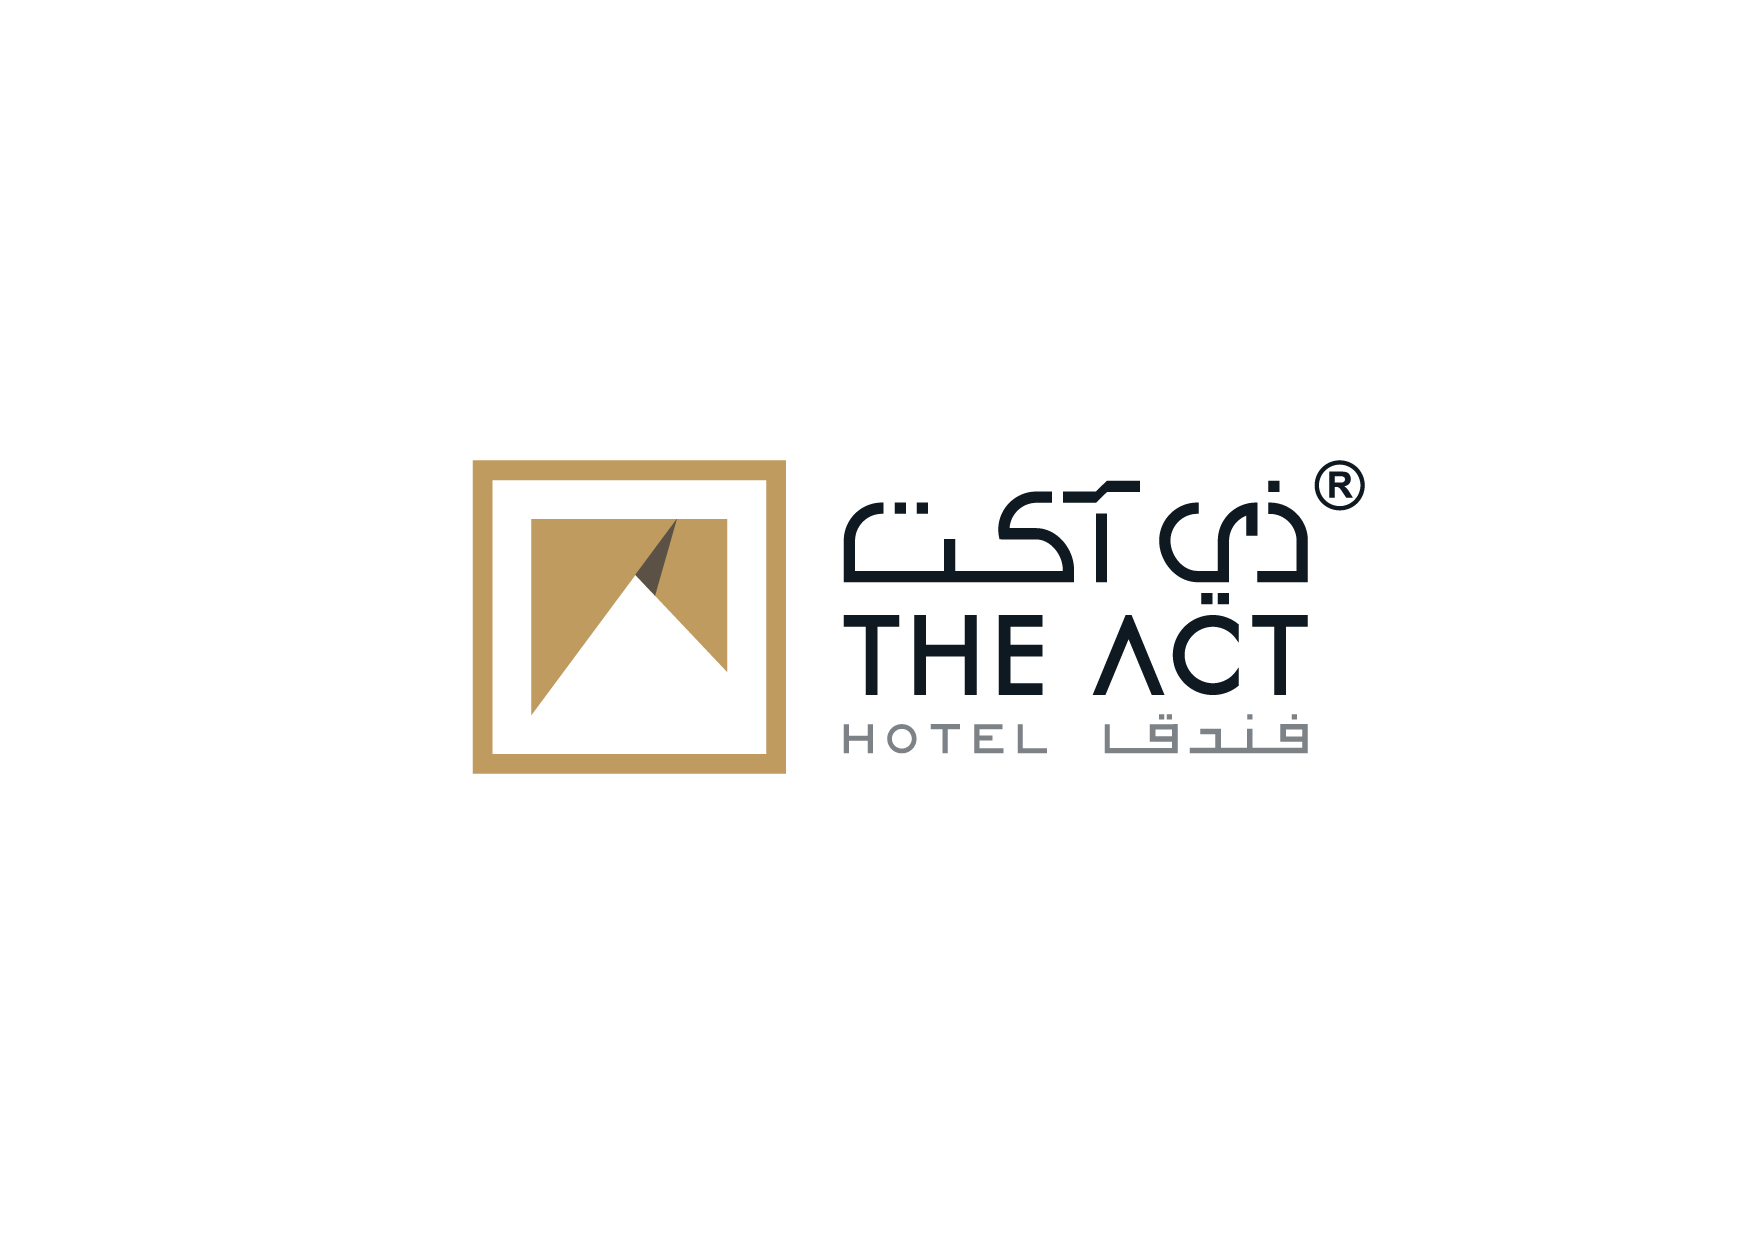 The Act Hotel